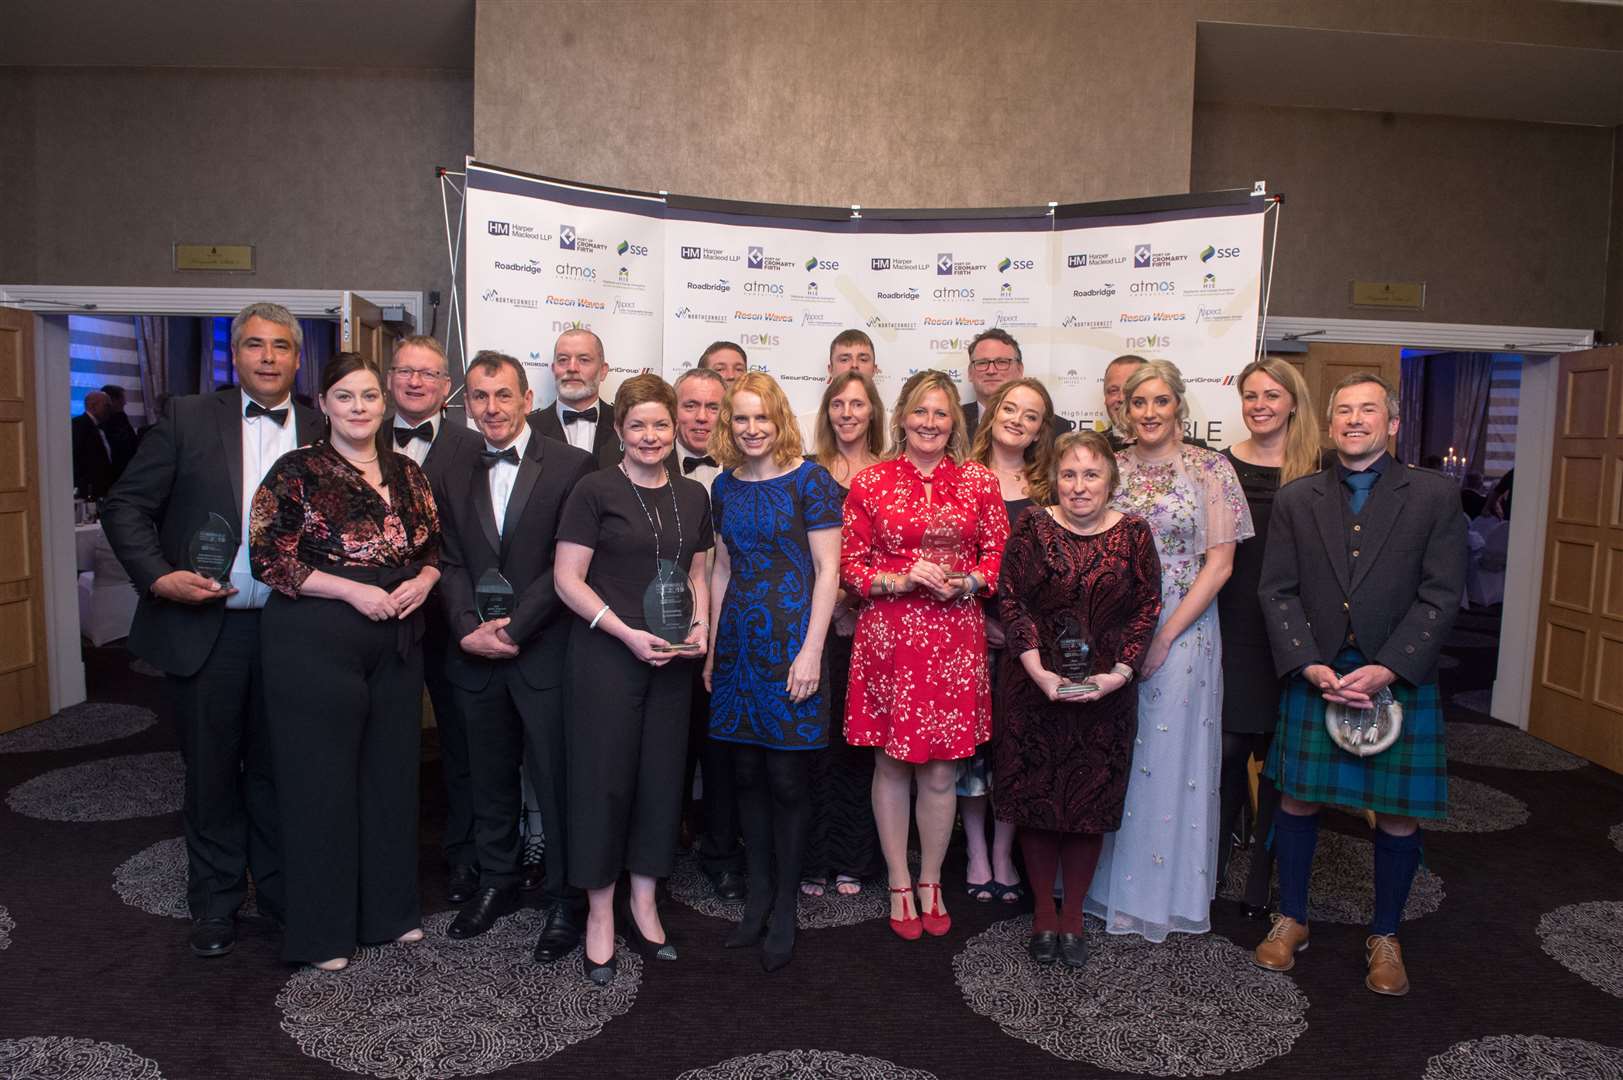 Last year's winners with their trophies at the inaugural Highlands and Islands Renewable Energy Awards in 2019.